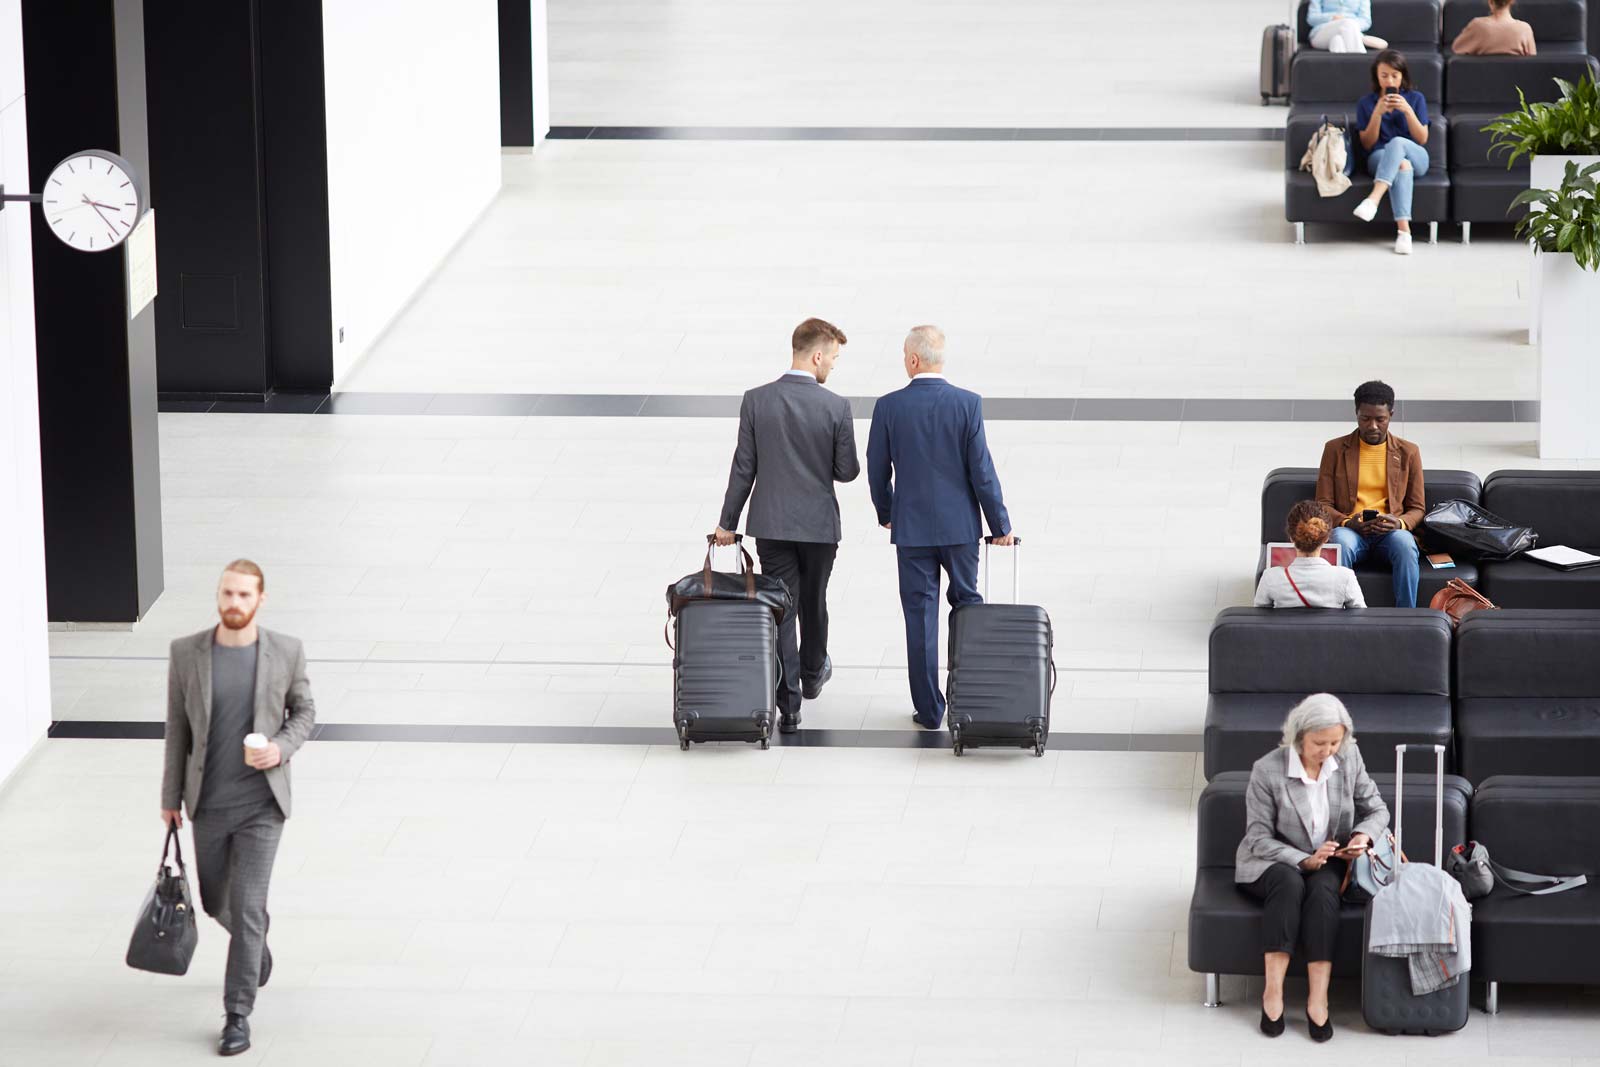 The best tips for travelers at airports